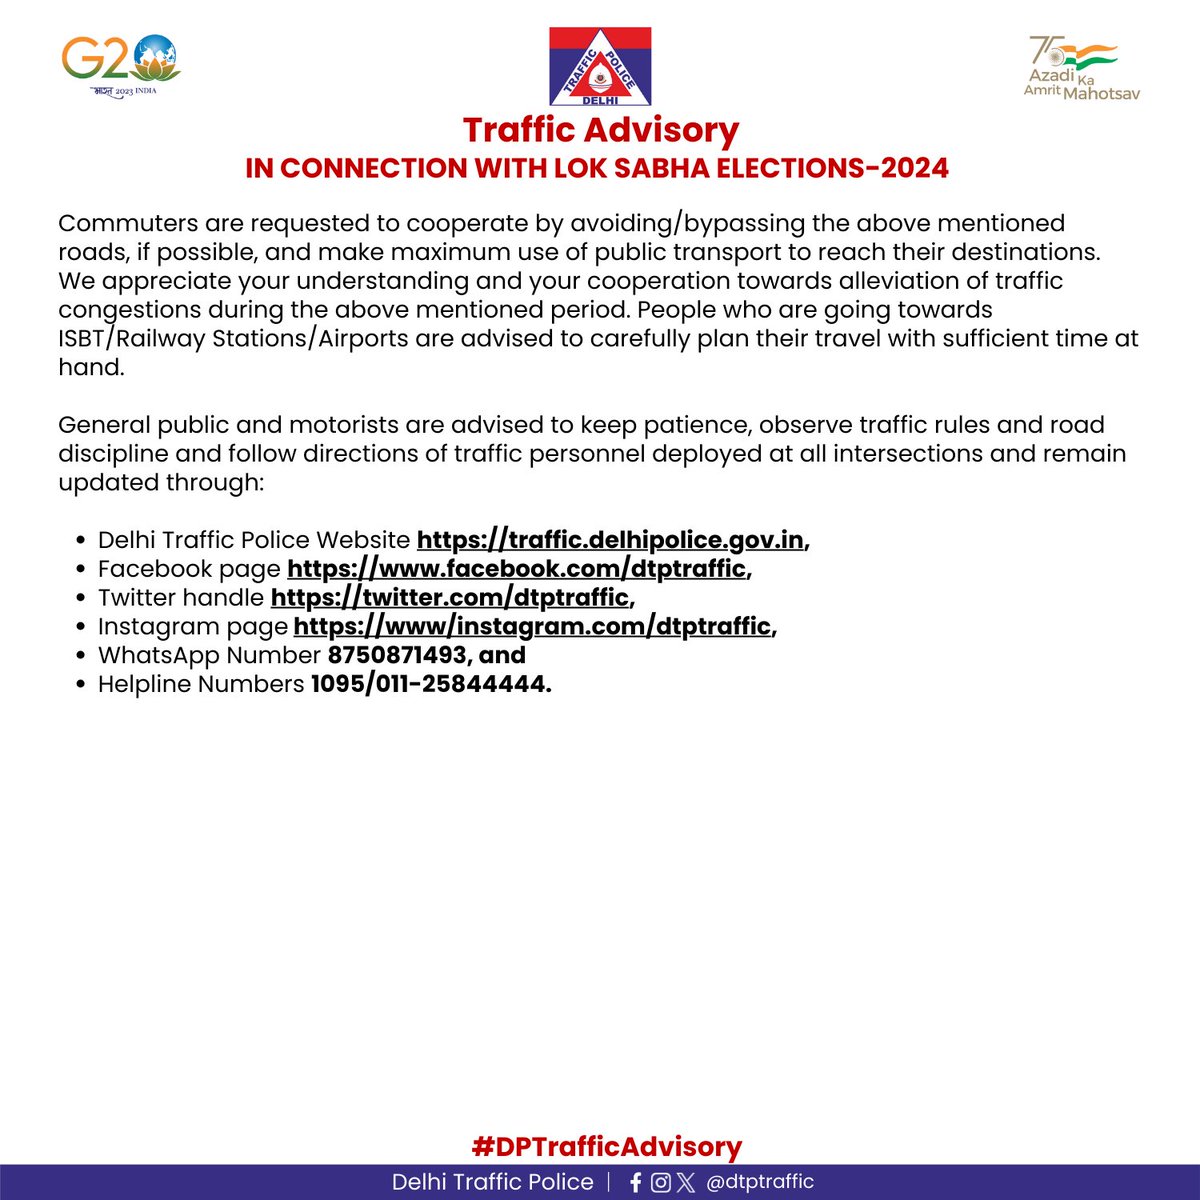 Traffic Advisory In view of Lok Sabha Elections-2024 related activities on 24.05.2024, traffic restrictions will be effective near ITI Nand nagri Delhi. Kindly follow the traffic advisory. #DPTrafficAdvisory